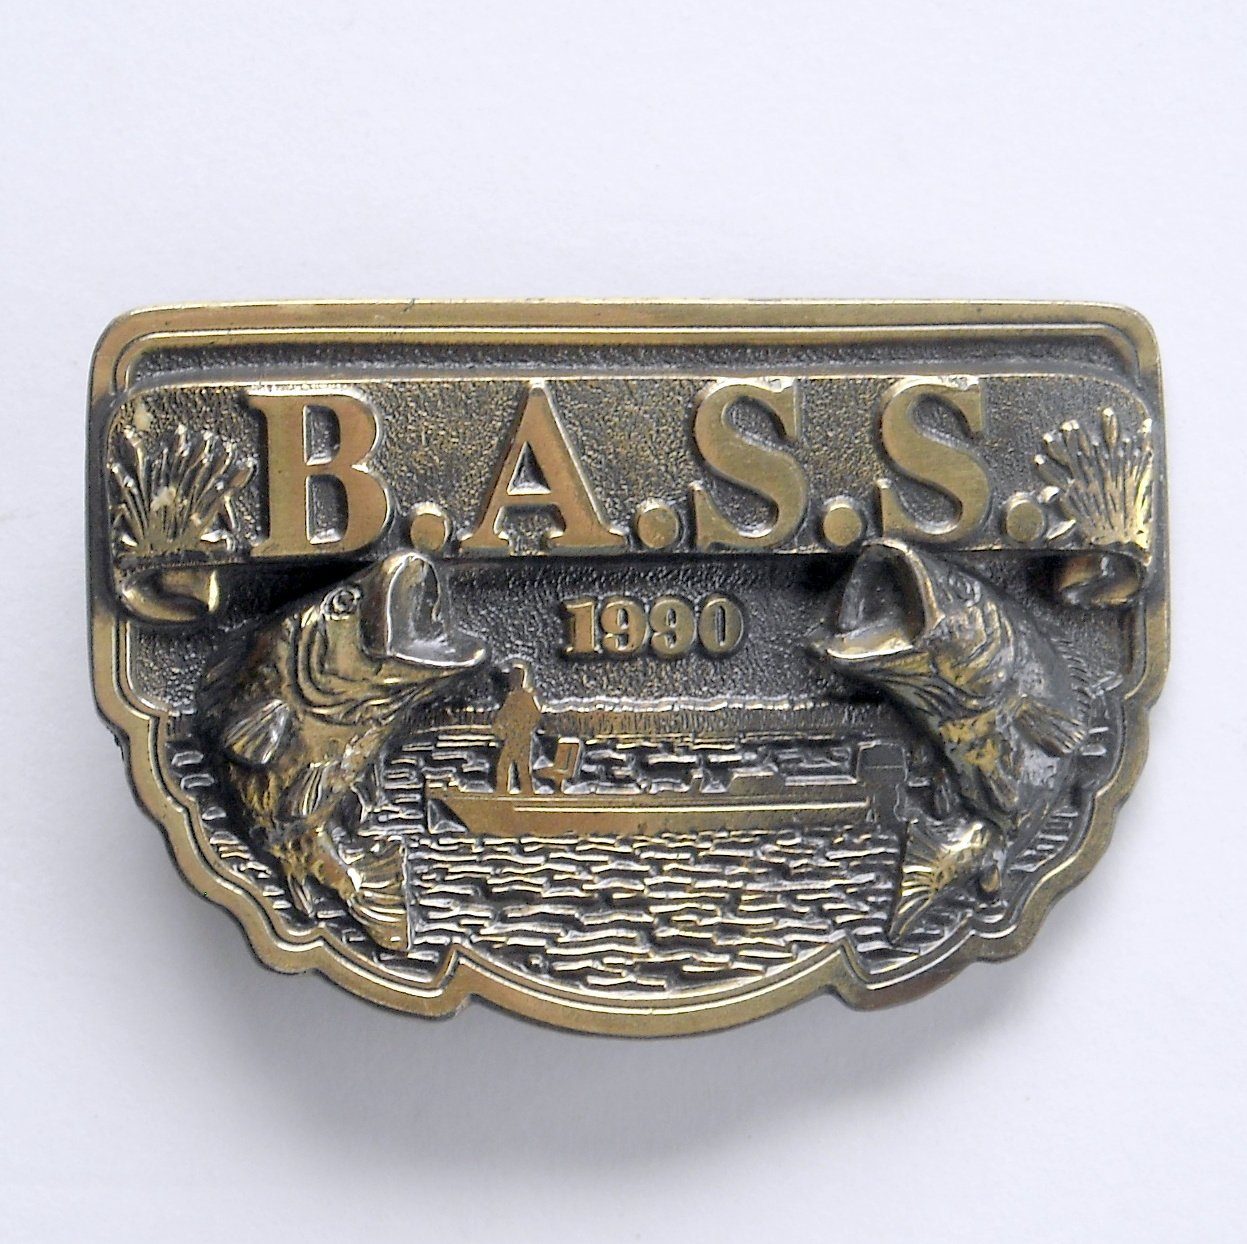 American Bass 1990 Anglers Sportsman Society Brass Color Belt Buckle